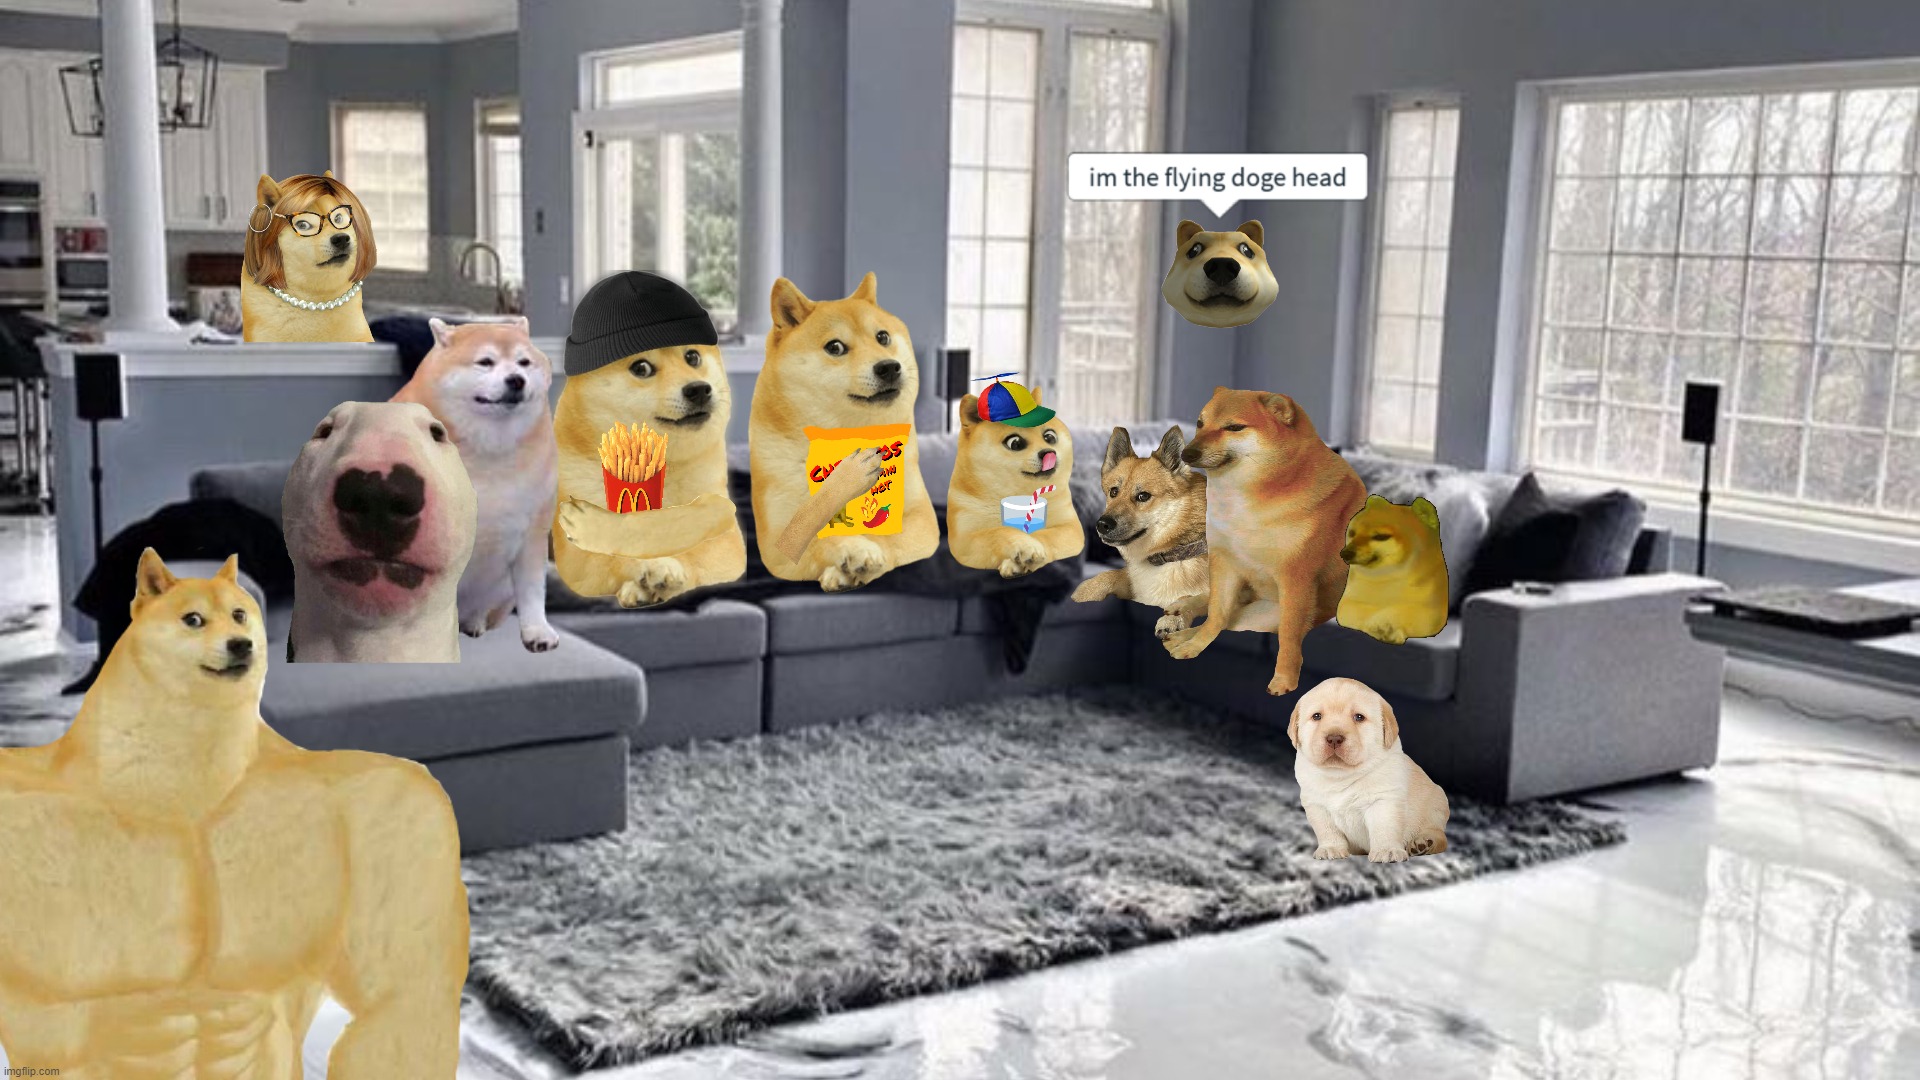 Le watching tv has arrived | image tagged in dogelore,watching tv,doge | made w/ Imgflip meme maker